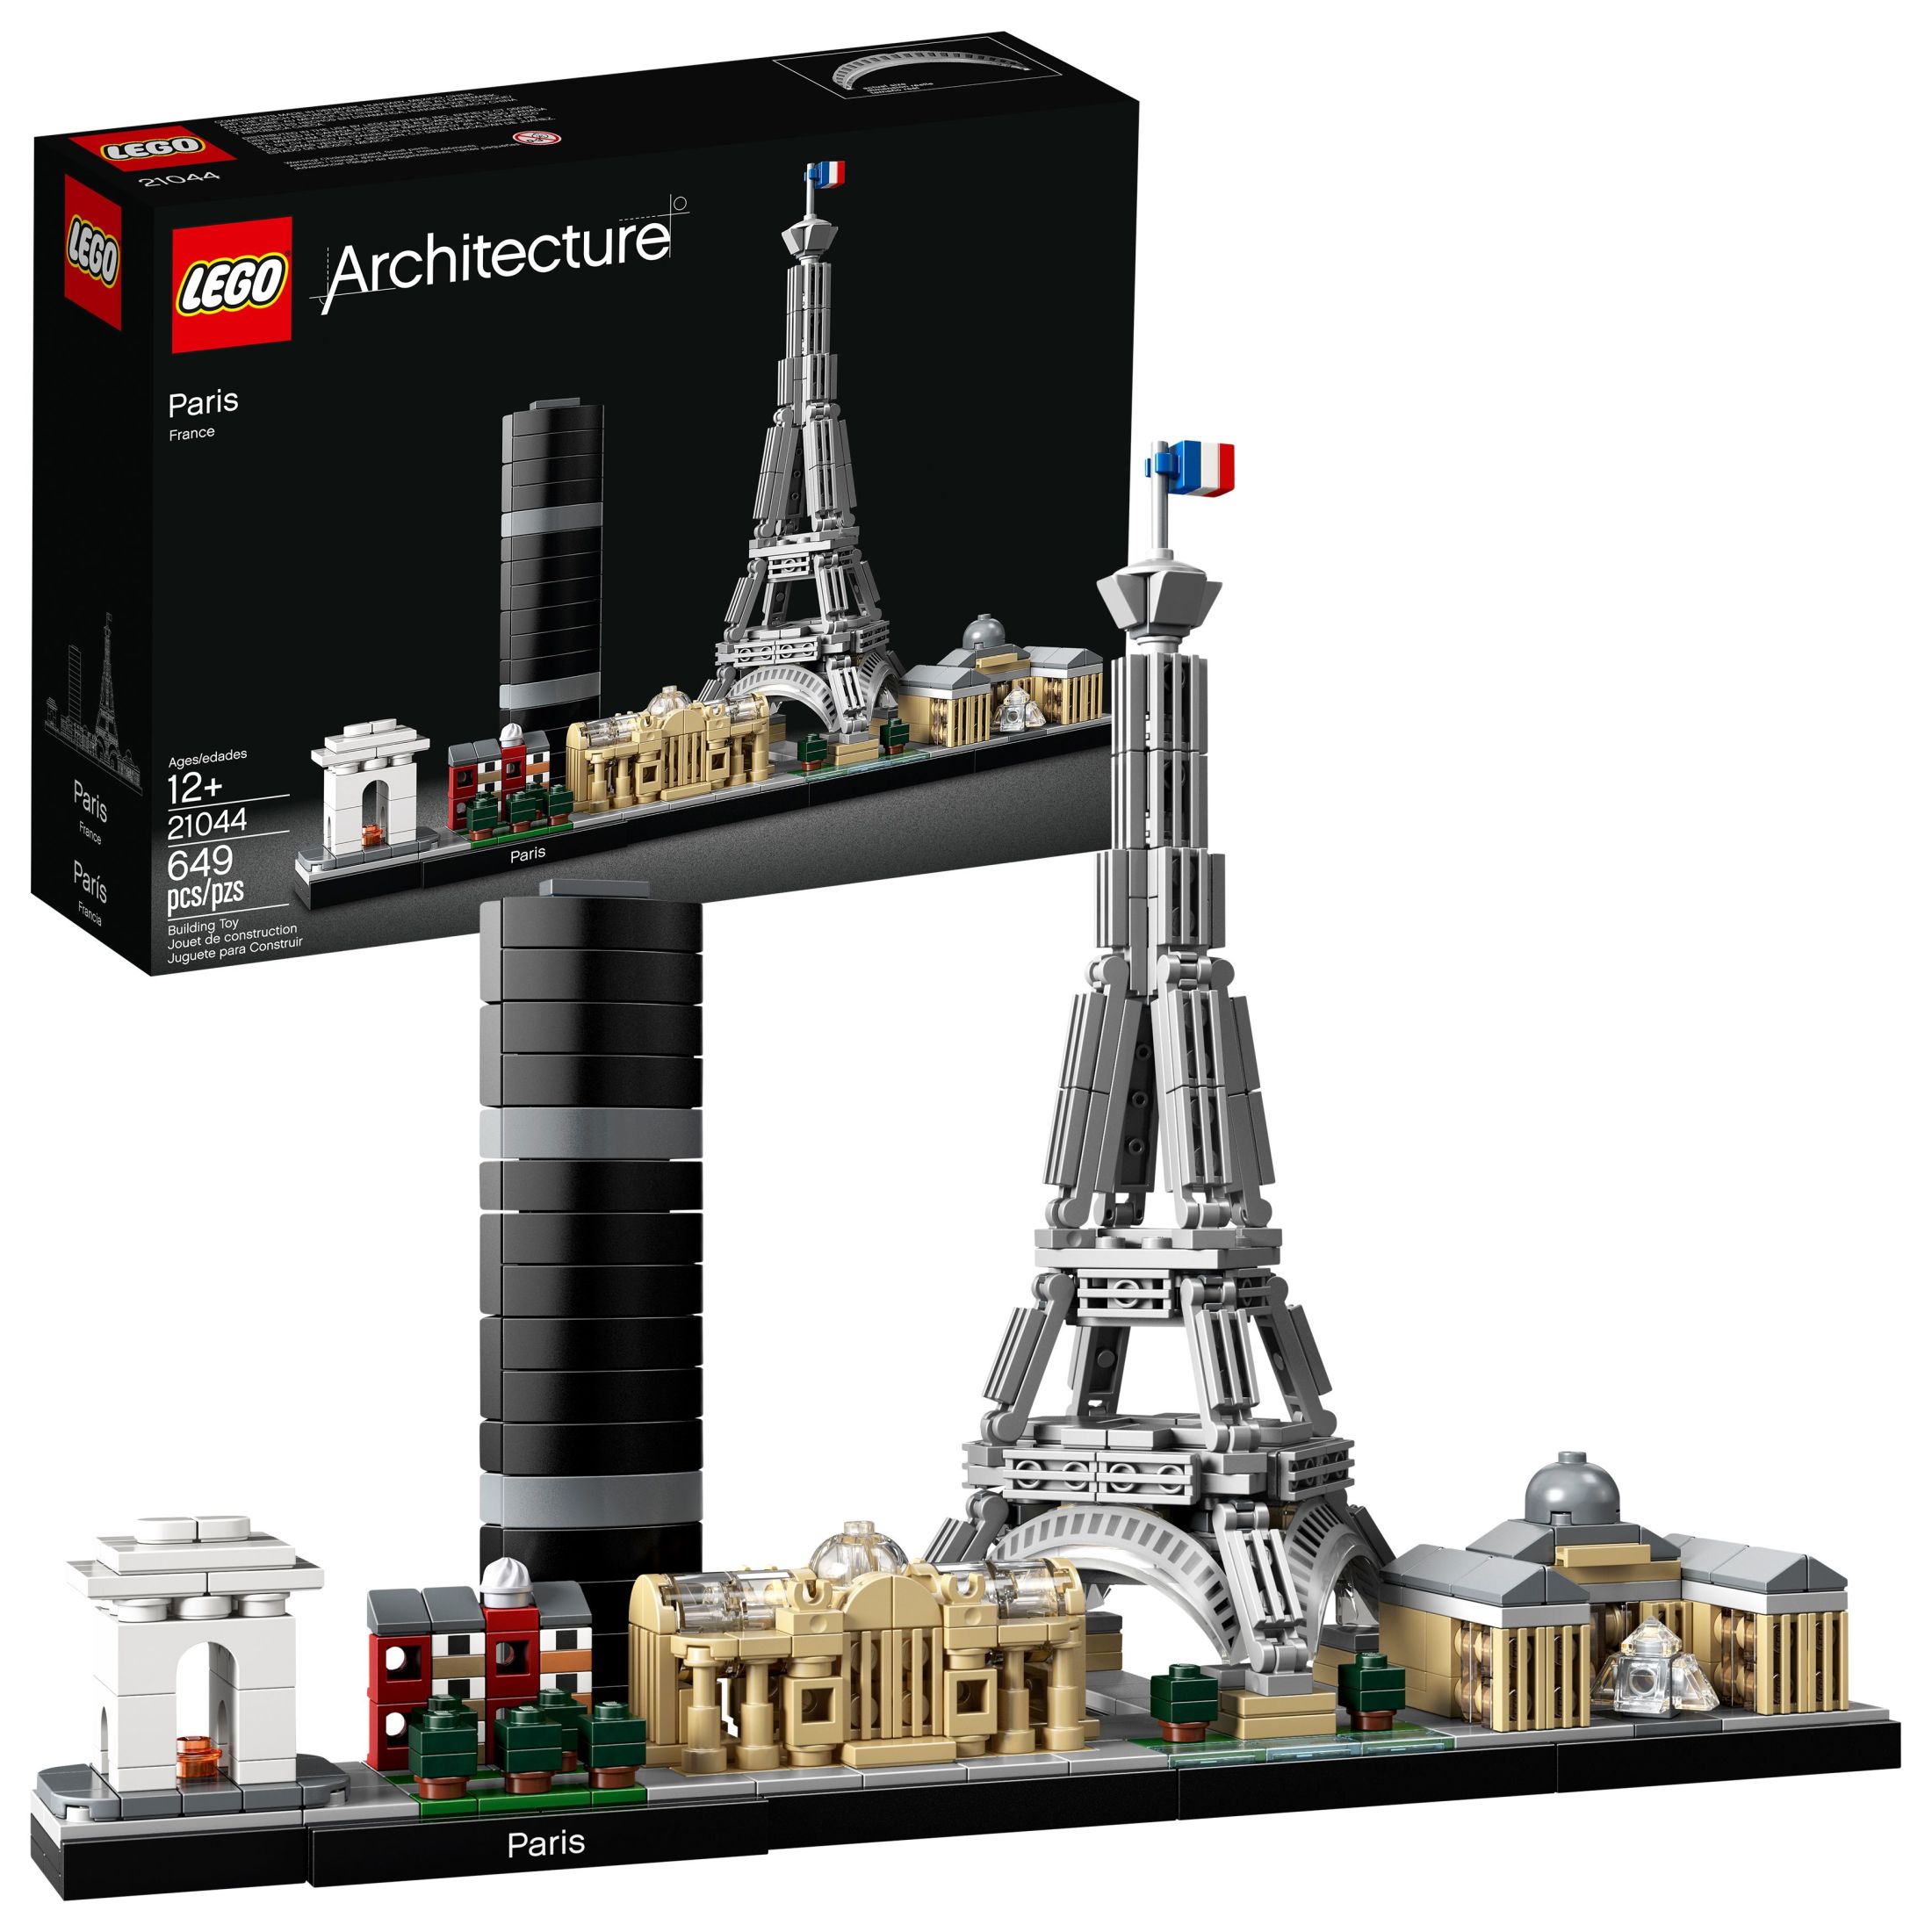 LEGO Architecture Paris Skyline, Collectible Model Building Kit with Eiffel Tower and The Louvre, Skyline Collection, Office Home Décor, Unique Gift to Unleash any Adult's Creativity, 21044 - image 1 of 6